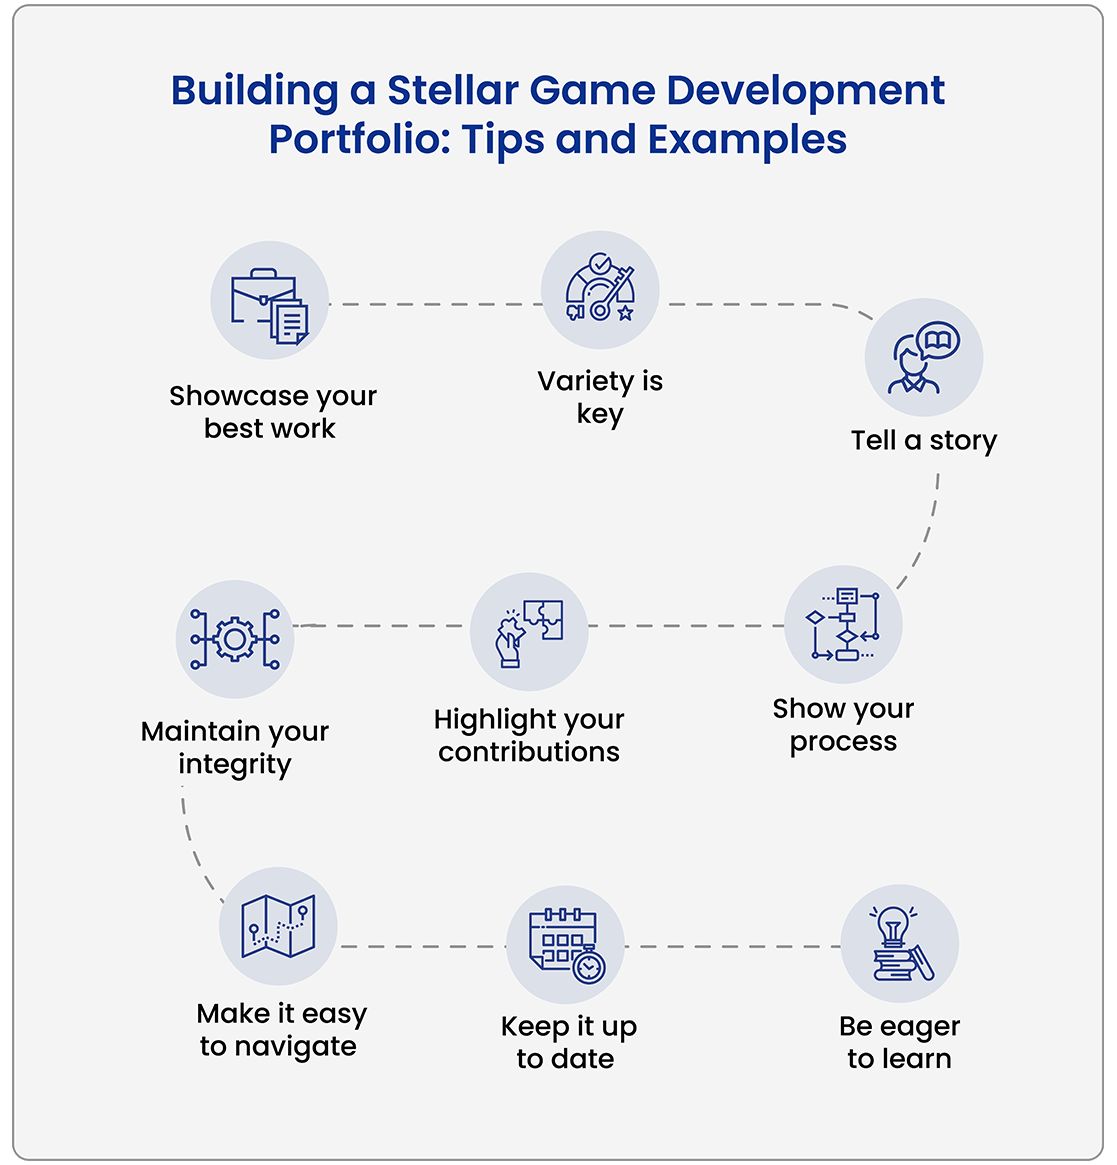 Tips and Examples for Building an Impressive Game Development Portfolio